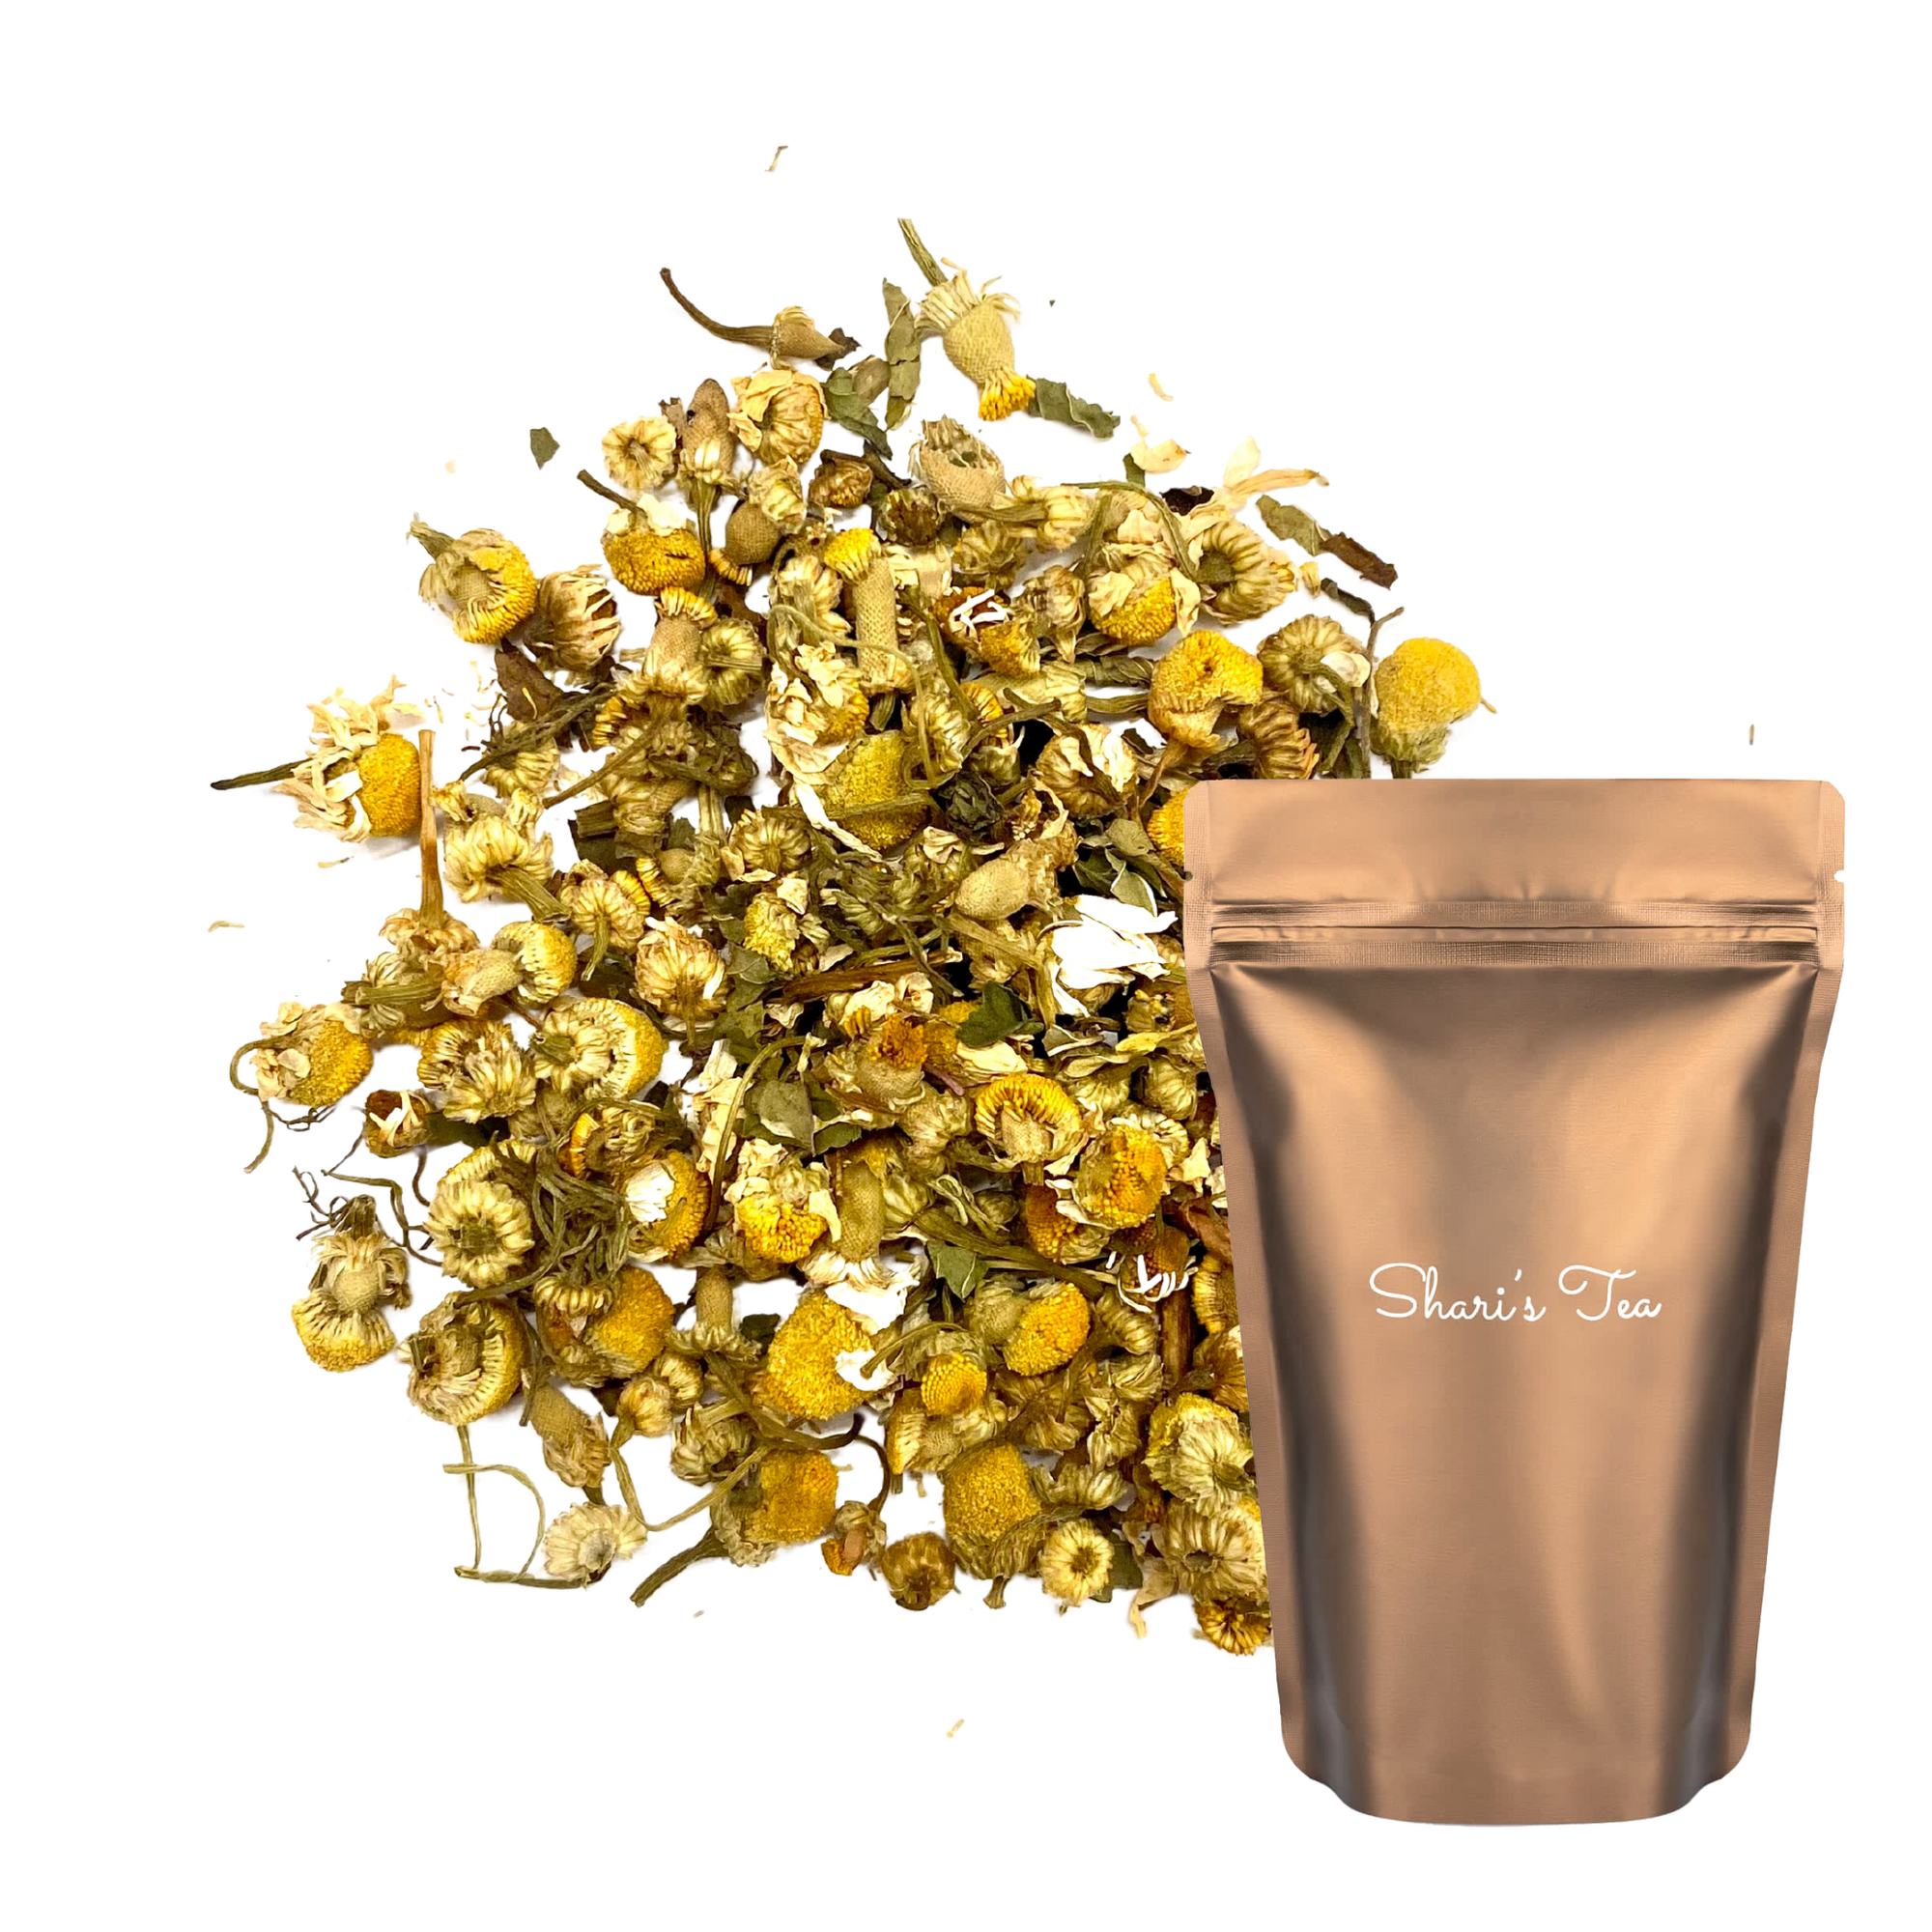 The BeneThe Benefits Chamomile Egyptian Herbal Tea of  Tea with stand pouch of Shari's Tea